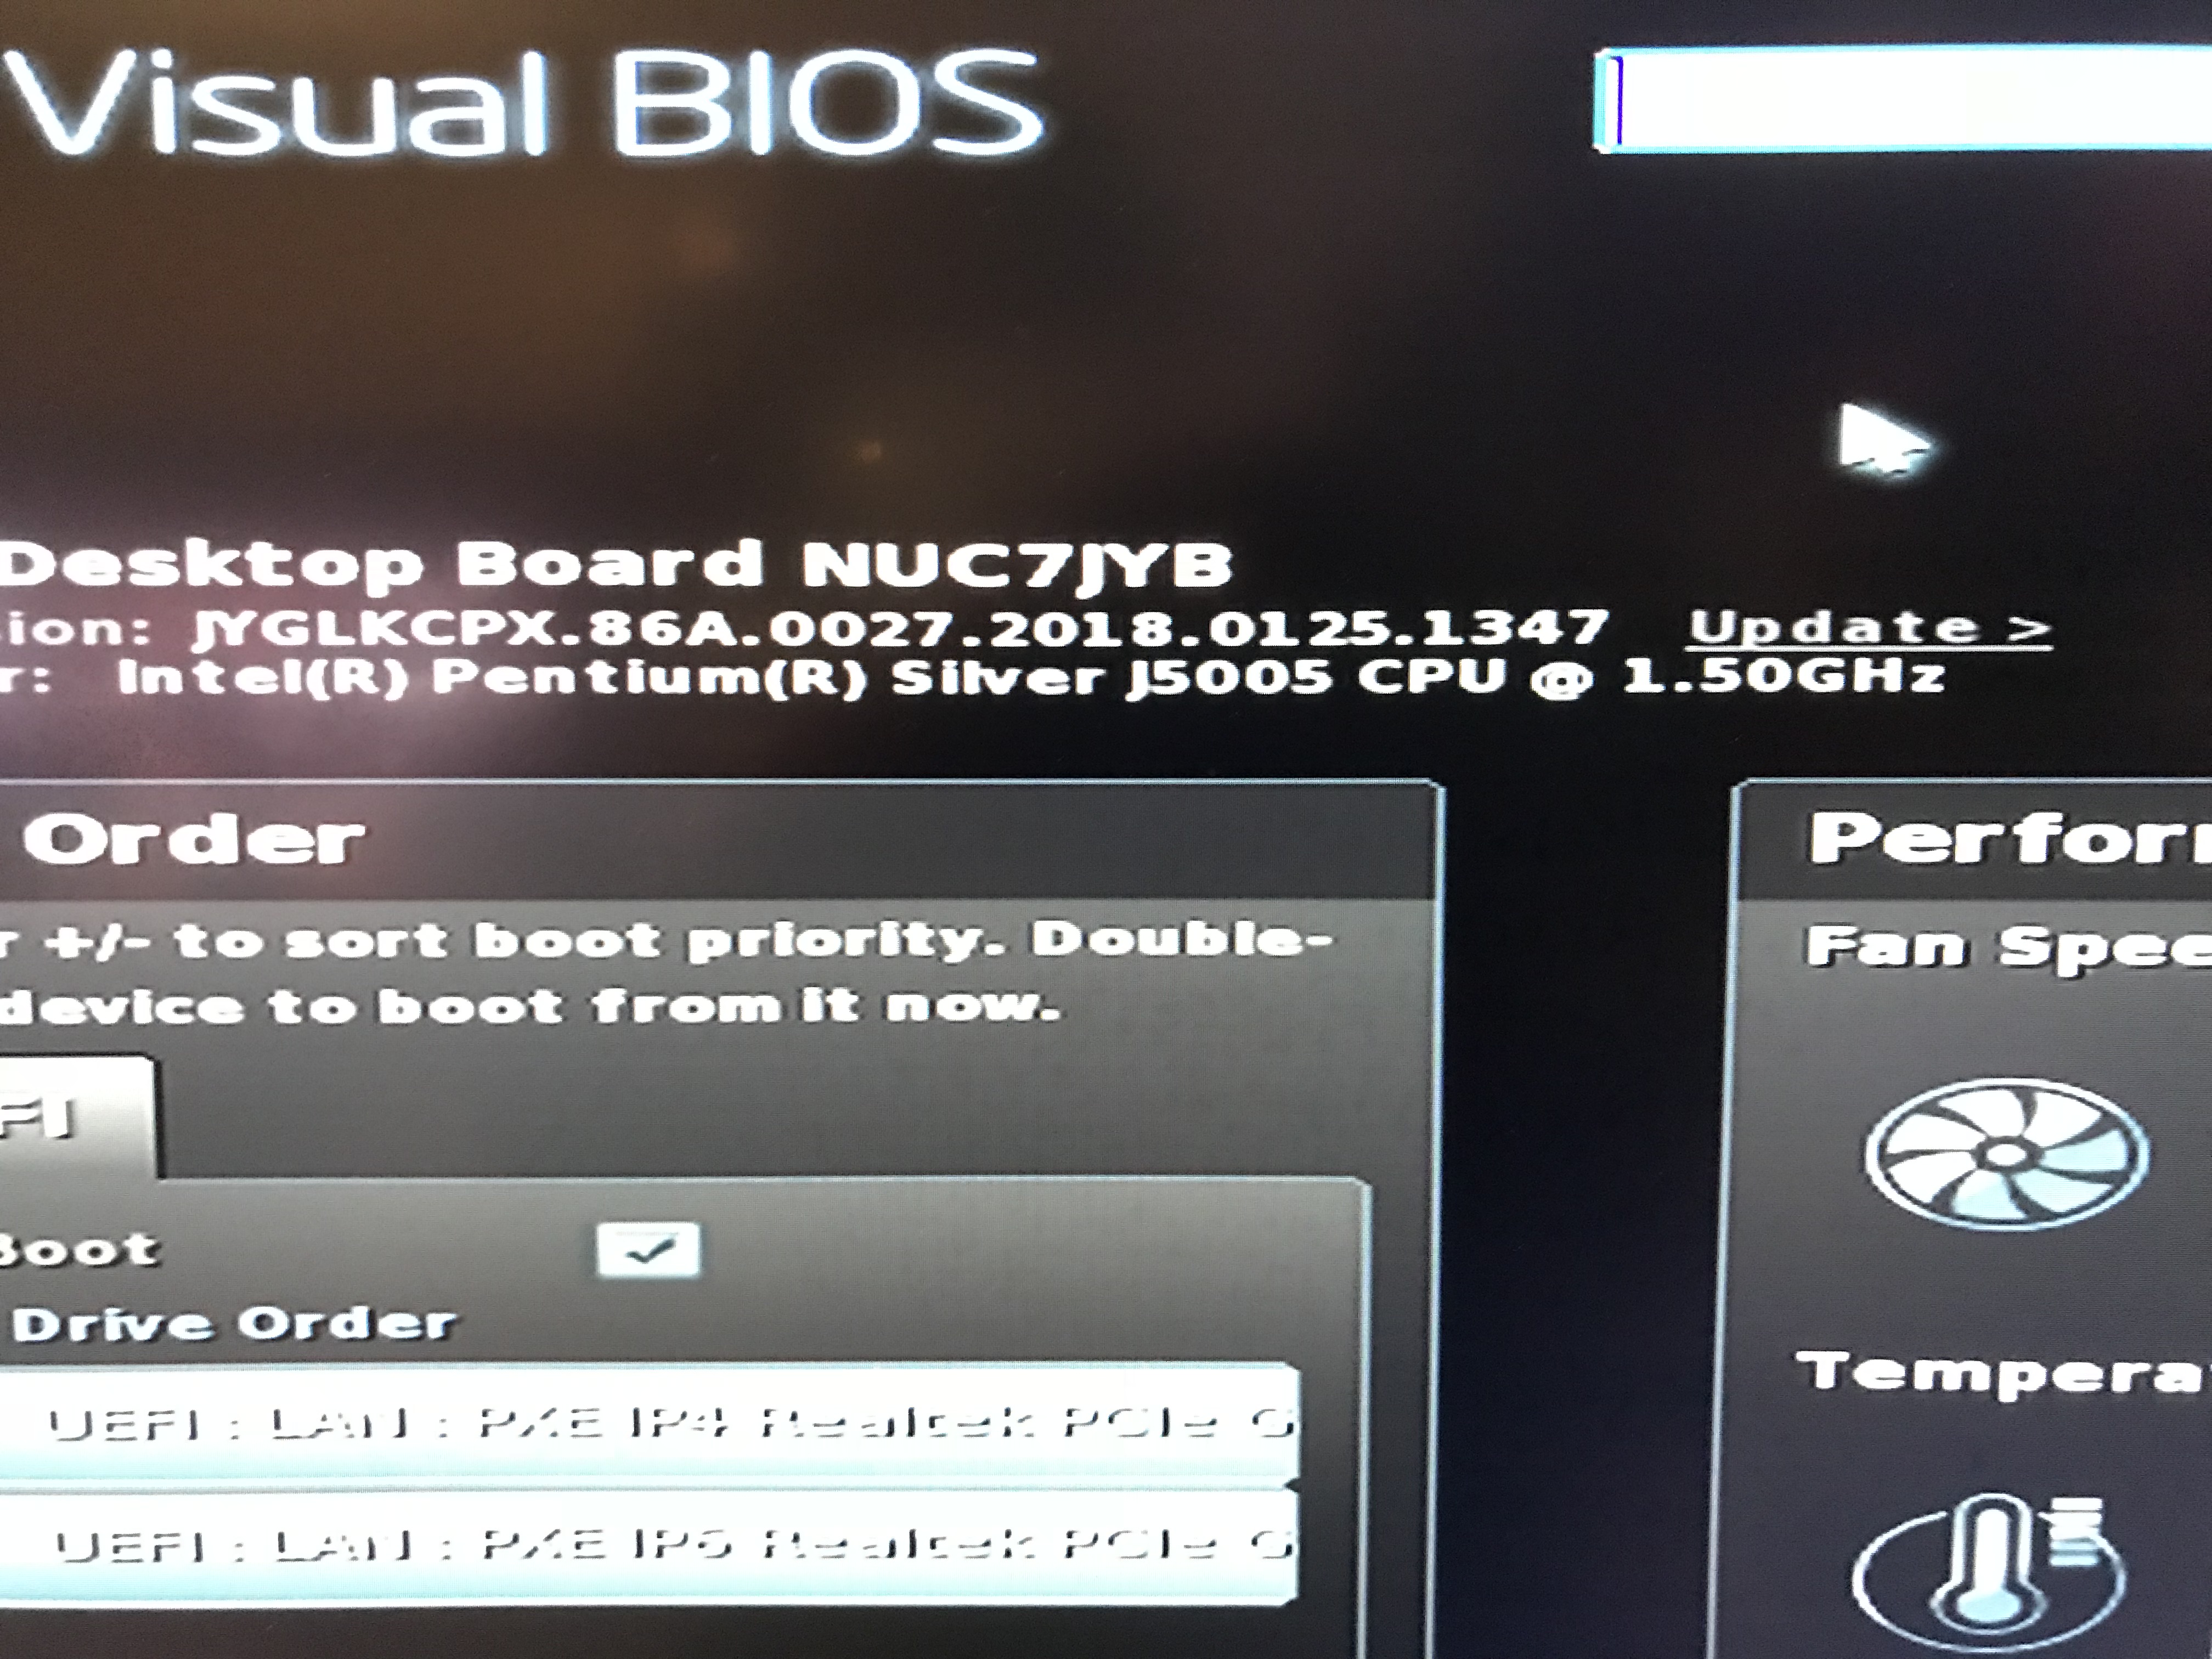 NUC7PJYH - A bootable device has not been detected! - Intel Communities